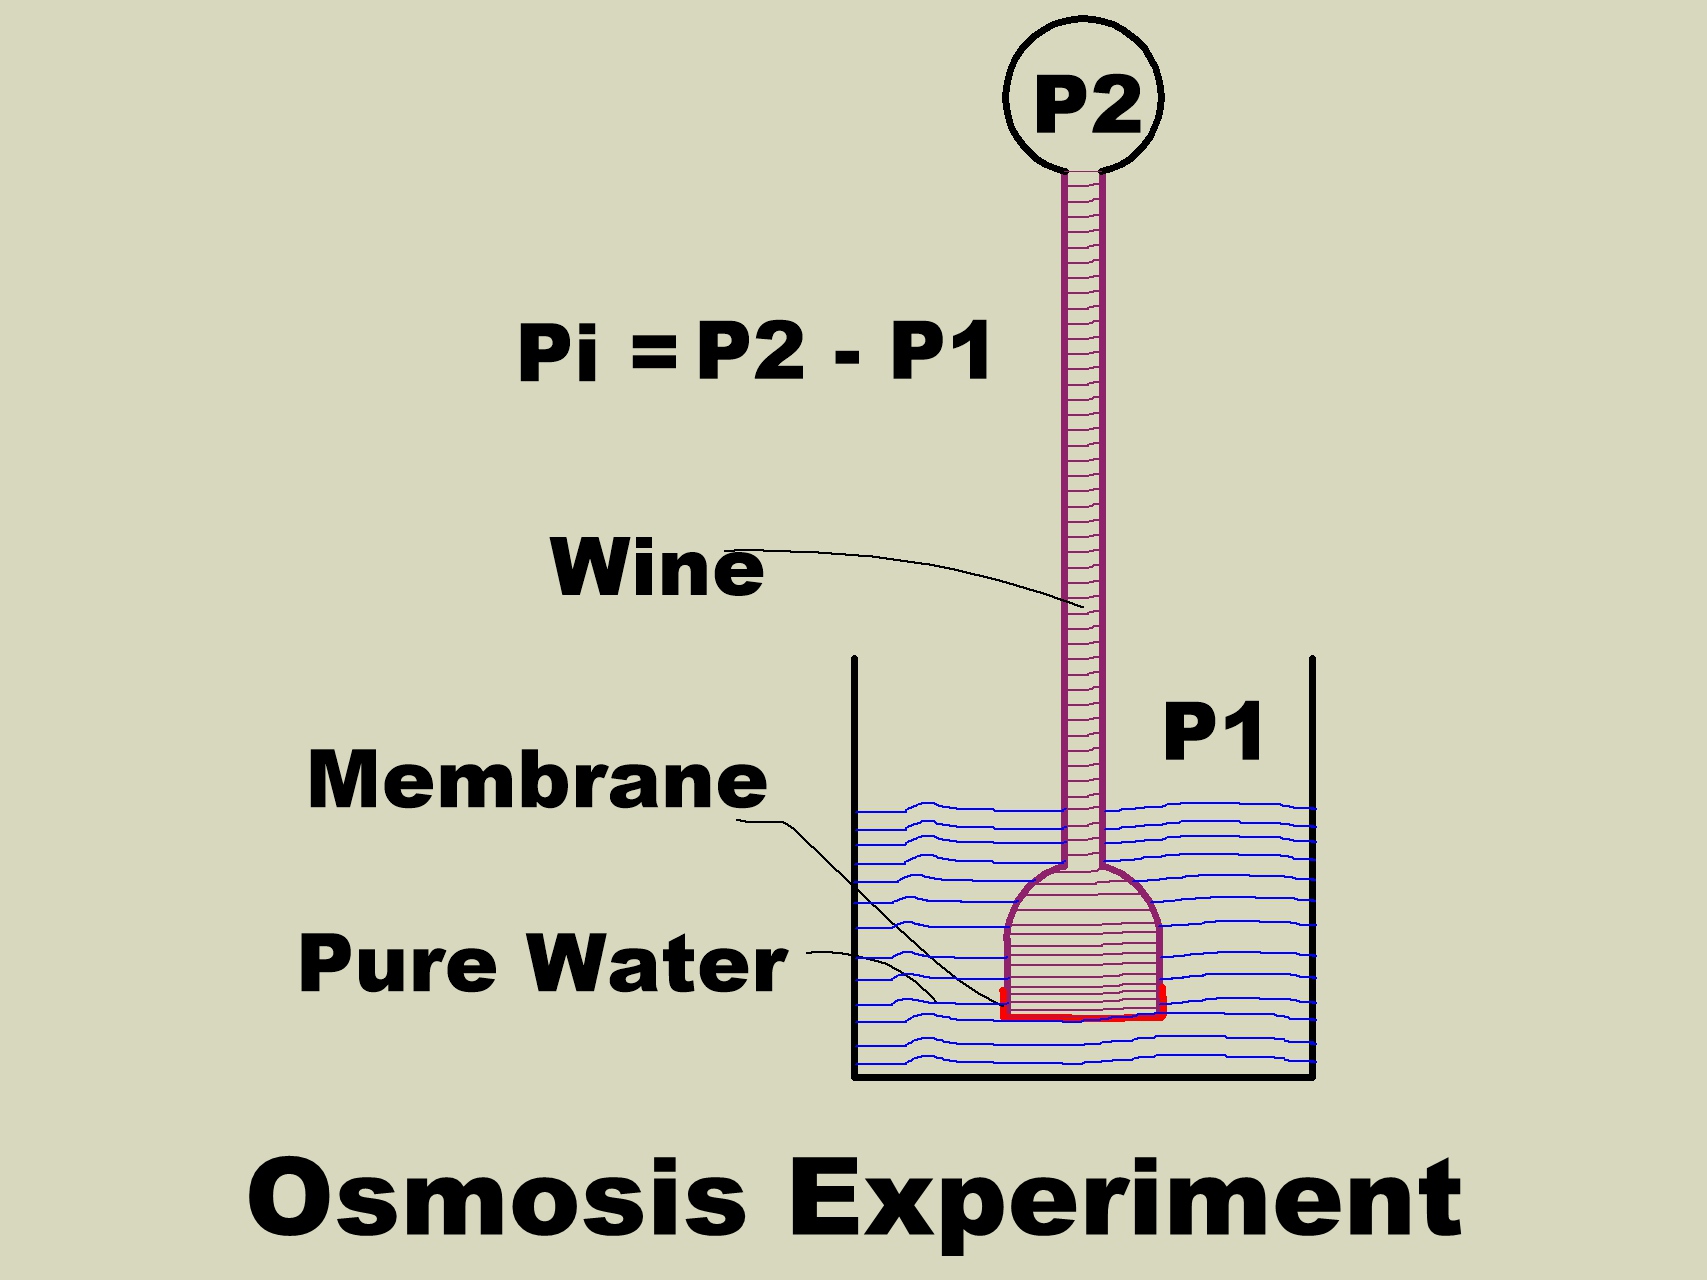 Osmosis Experiment